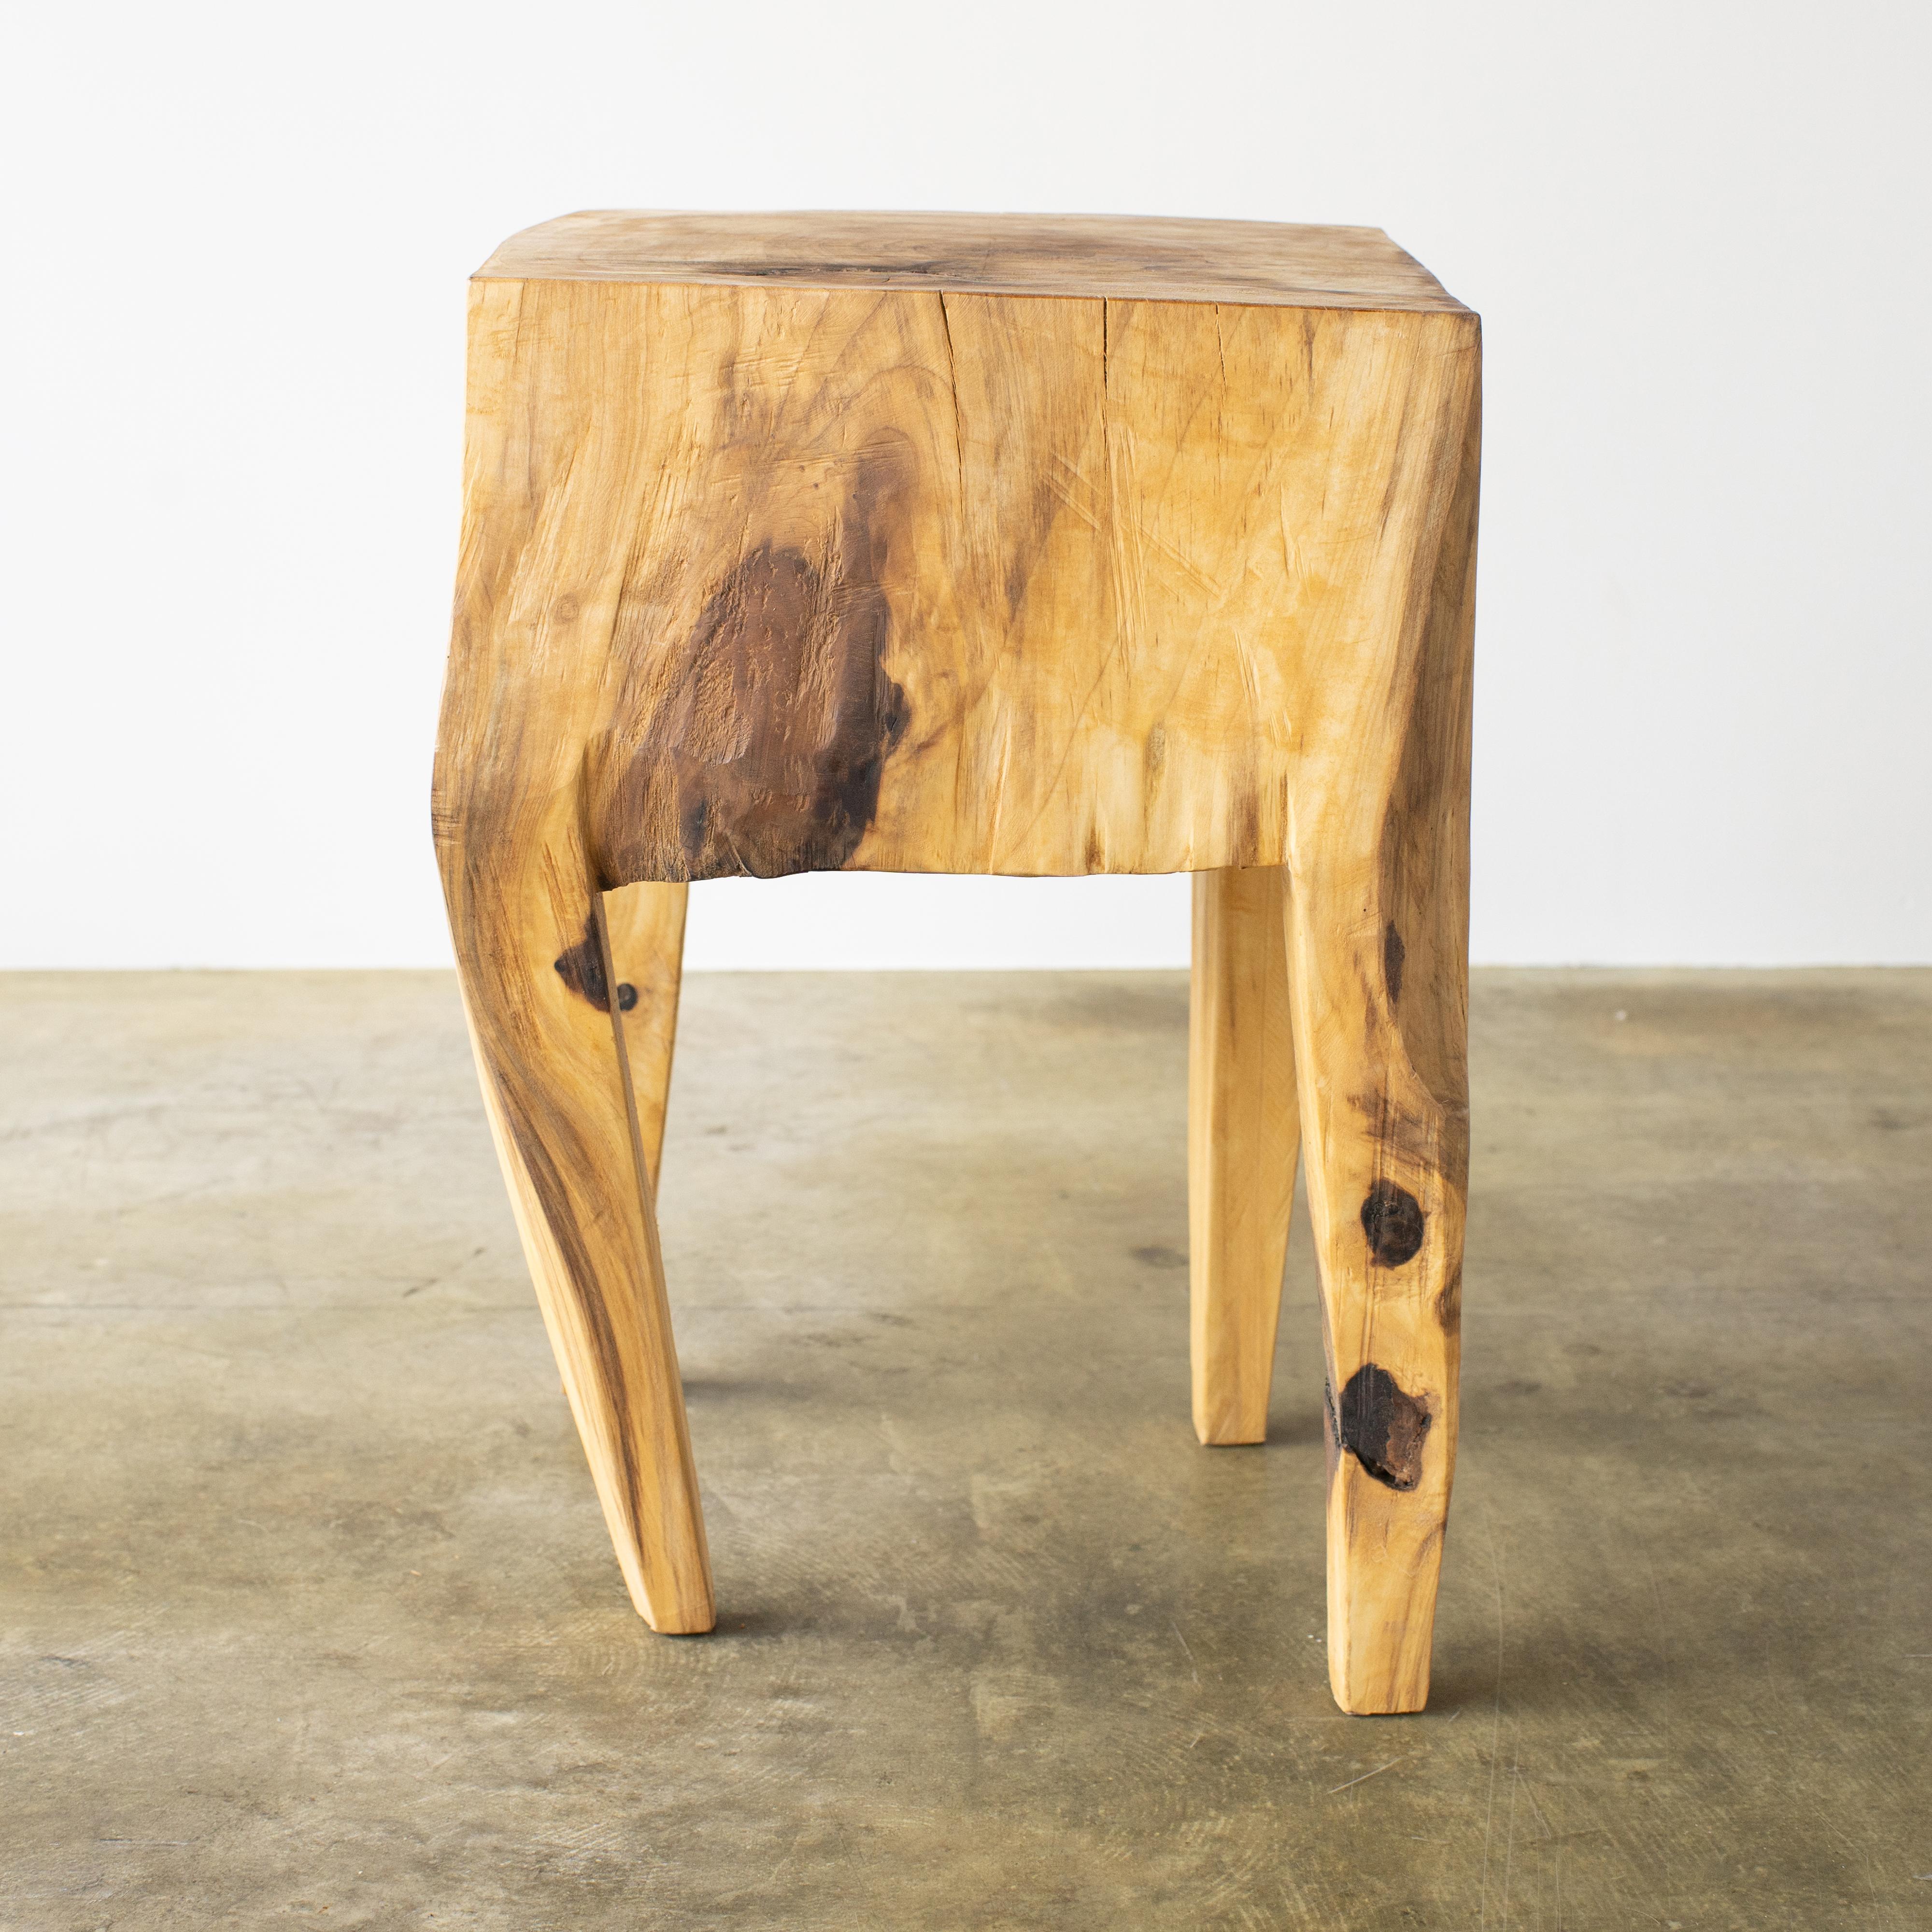 Name: Long John
Sculptural stool by Hiroyuki Nishimura and zone carved furniture
Material: Paulownia
This work is carved from log with some kinds of chainsaws.
Most of wood used for Nishimura's works are unable to use anything, these woods are